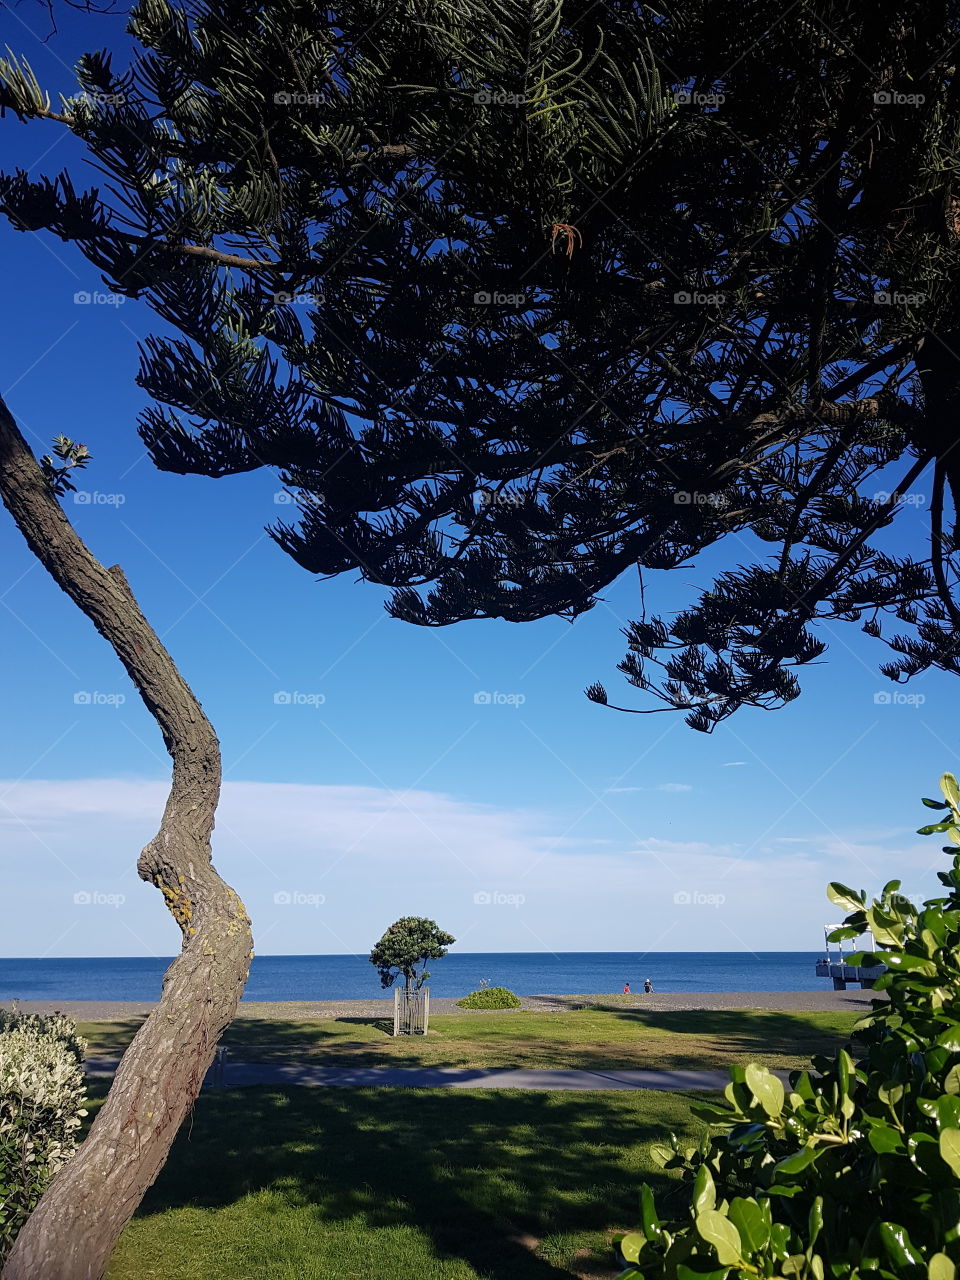 A beautiful summers day in Napier. Looking out to sea through a frame of trees and nature.